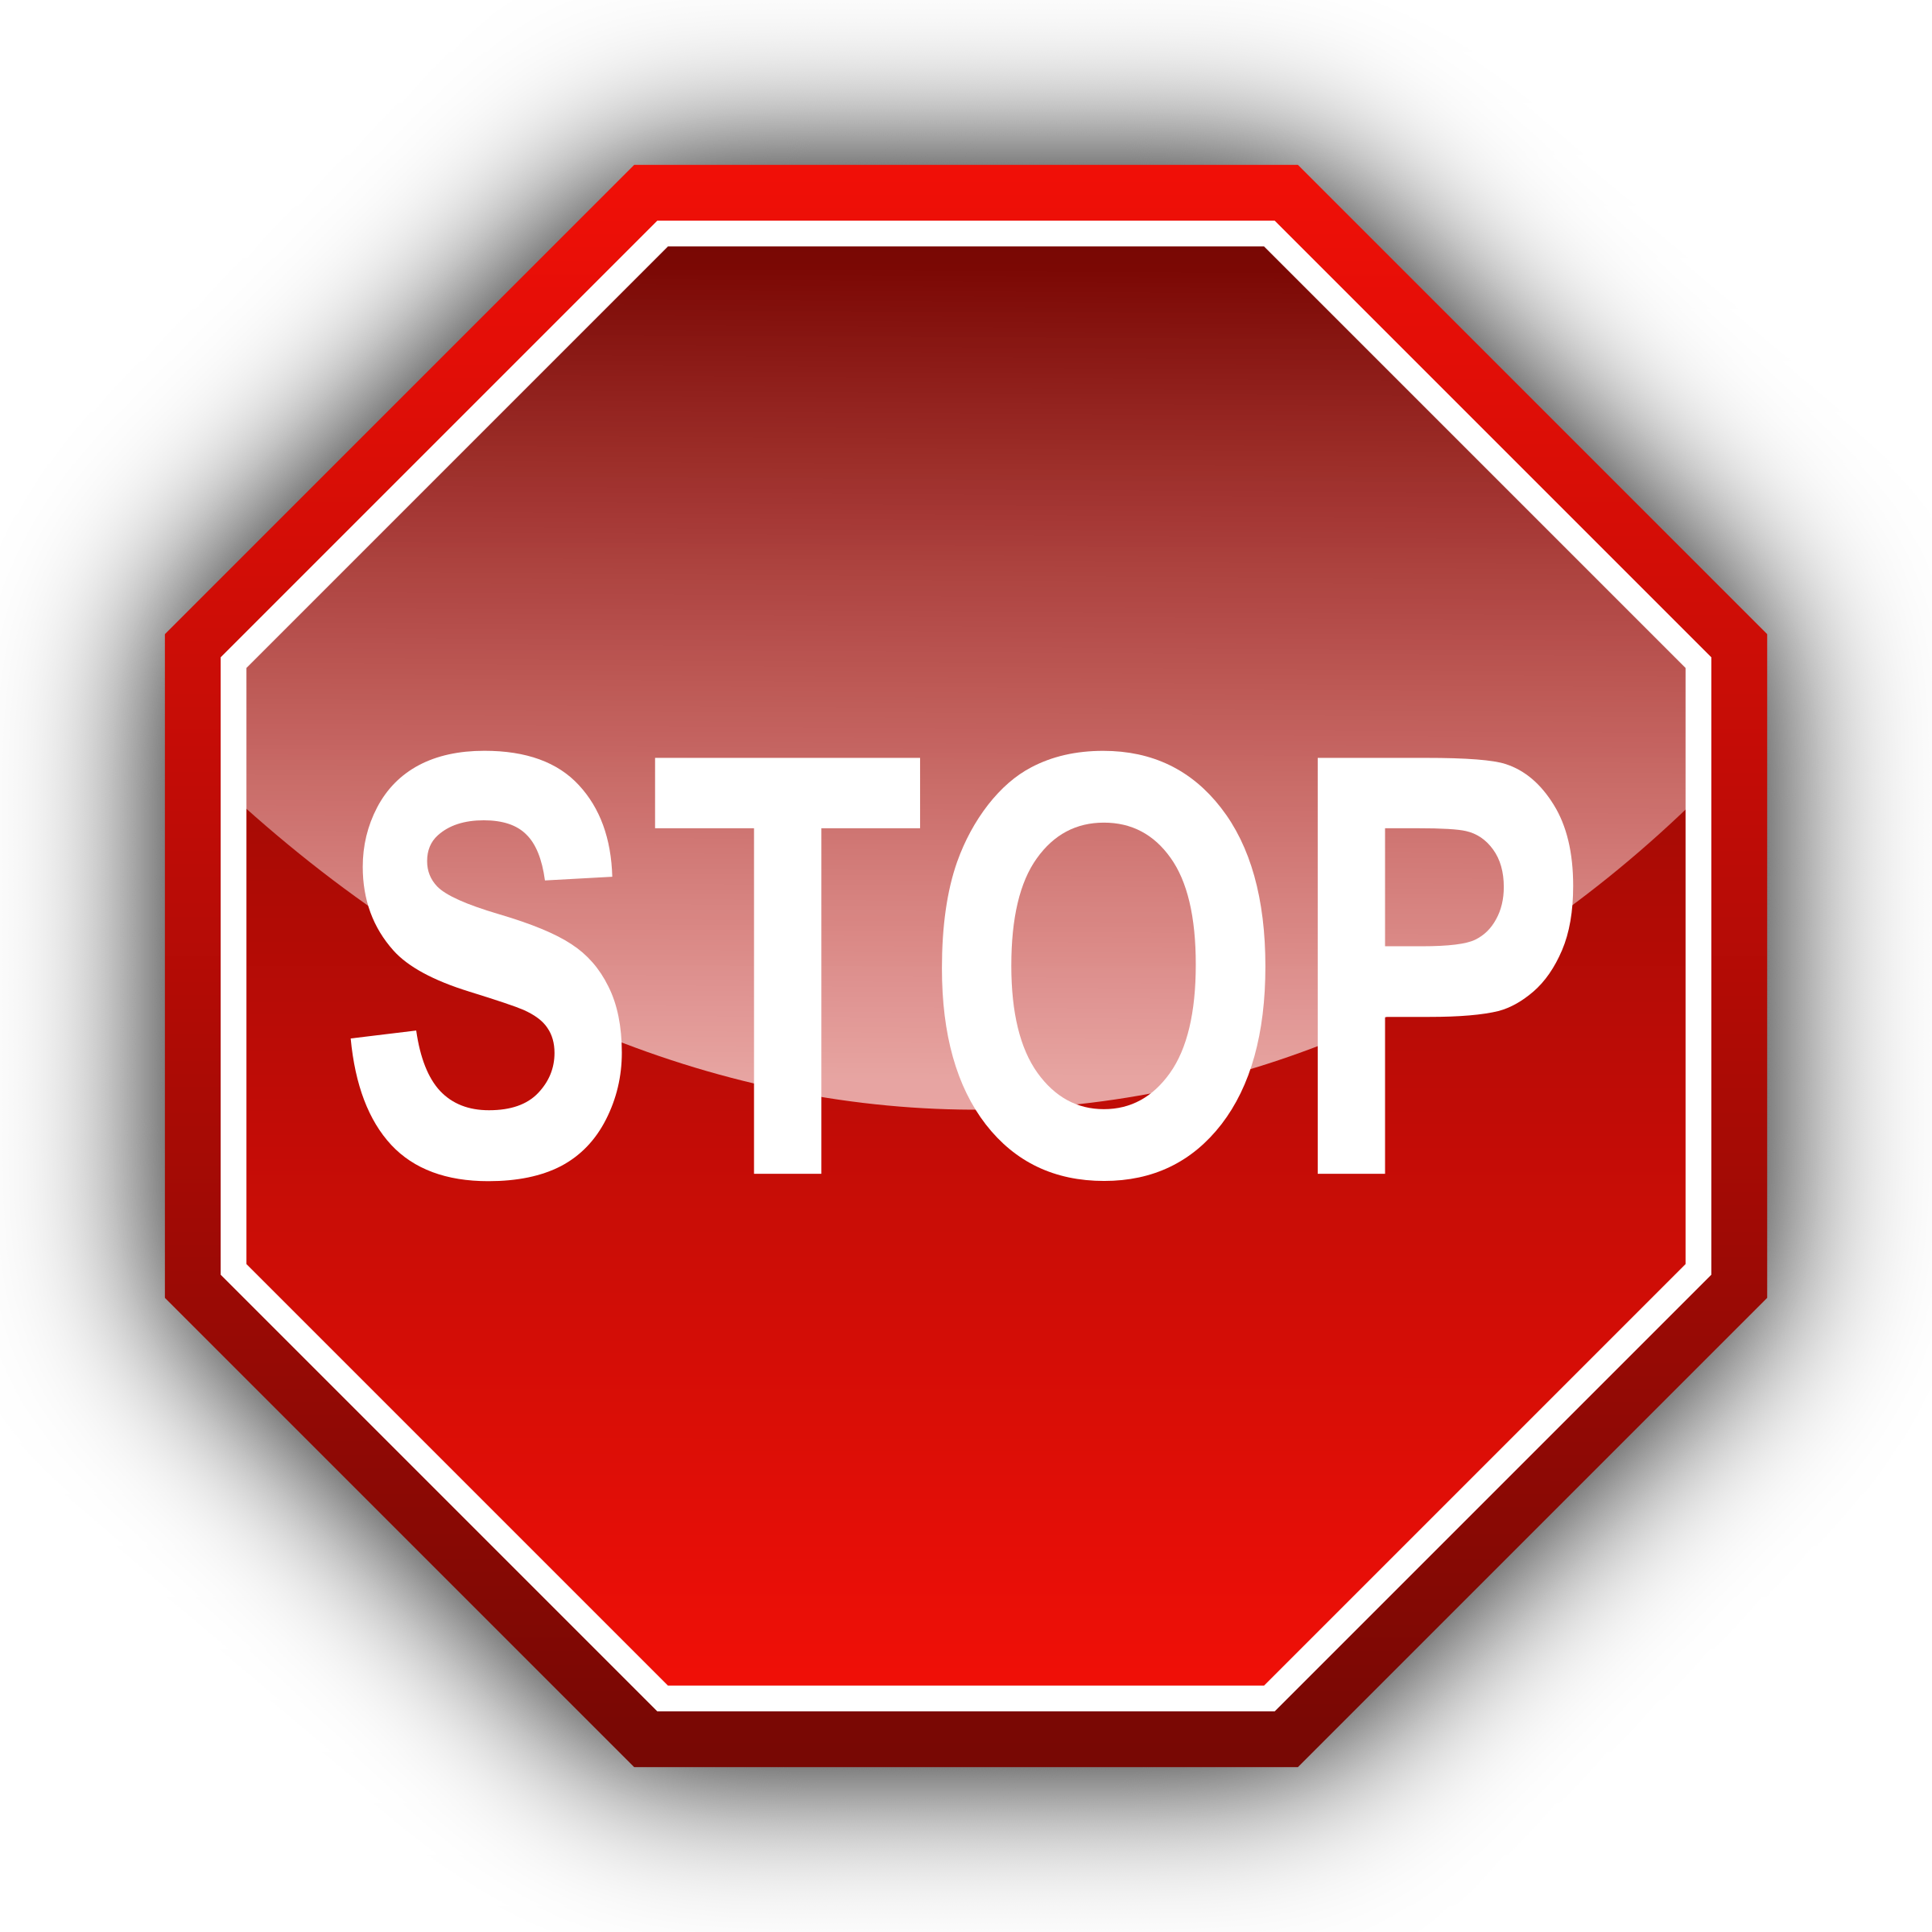 microsoft clipart stop sign - photo #16